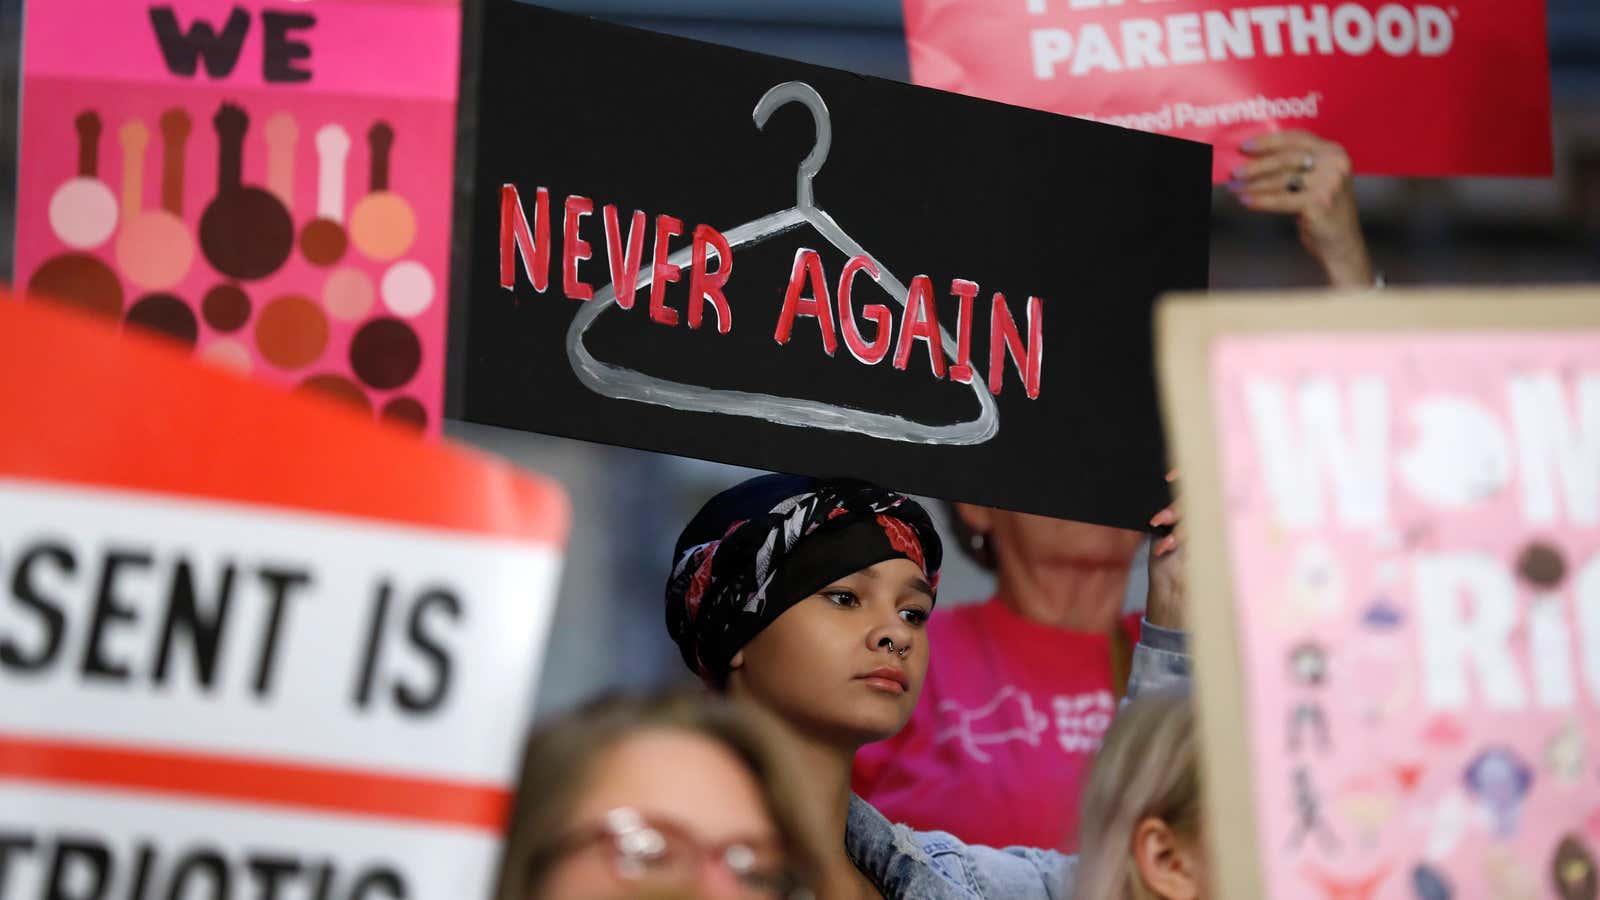 August Mulvihill, of Norwalk, Iowa, center, holds a sign during a rally to protest recent abortion bans on May 21, 2019, at the Statehouse in Des Moines, Iowa.